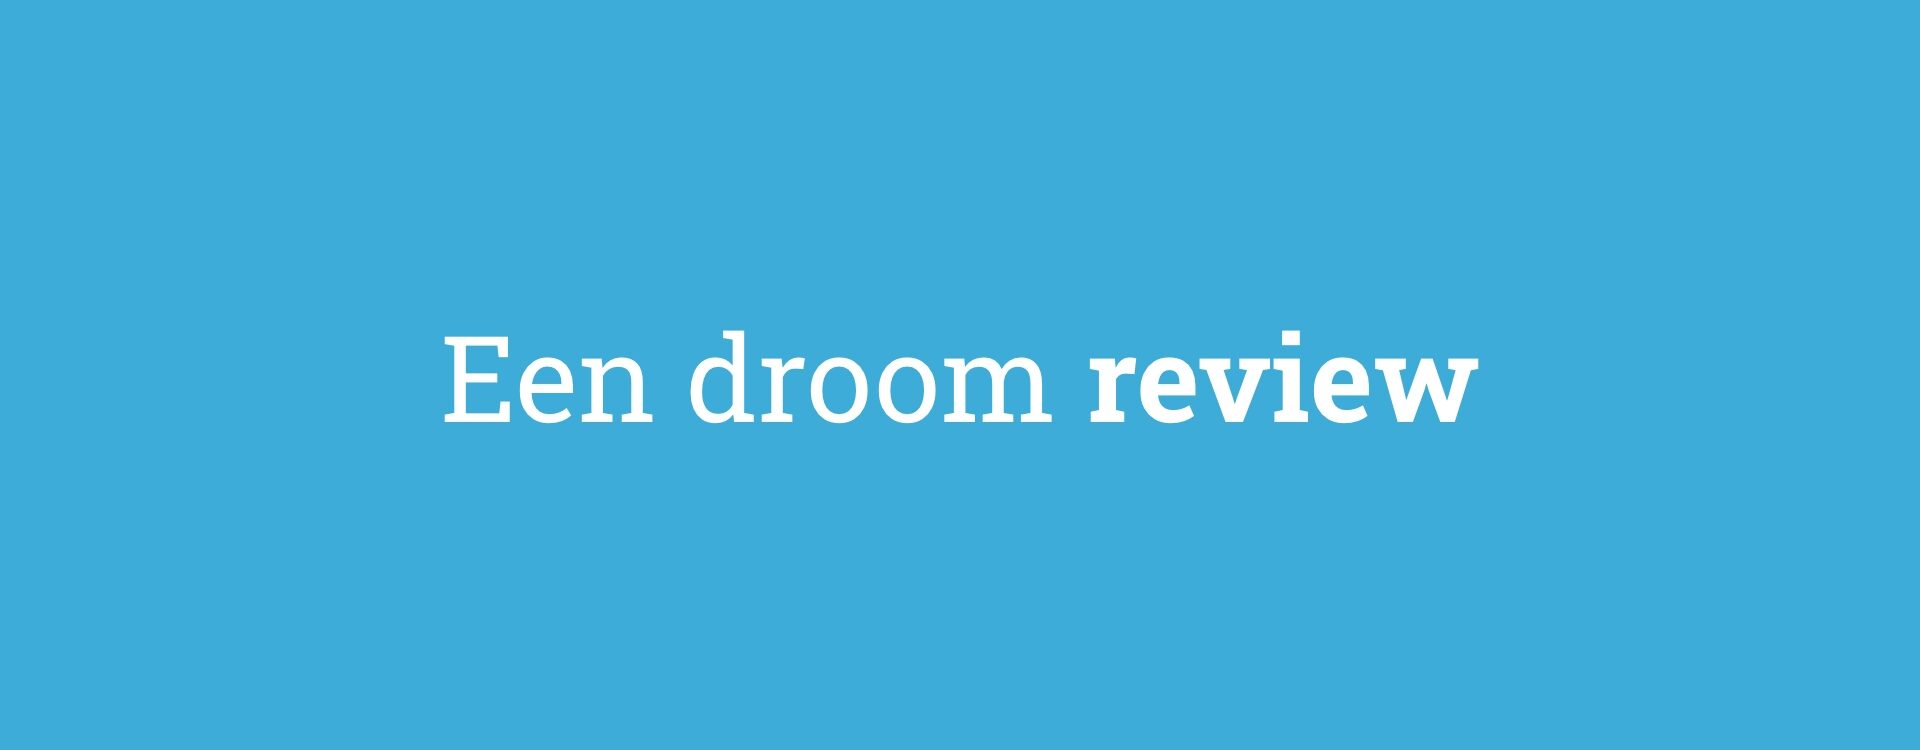 Droom review 2